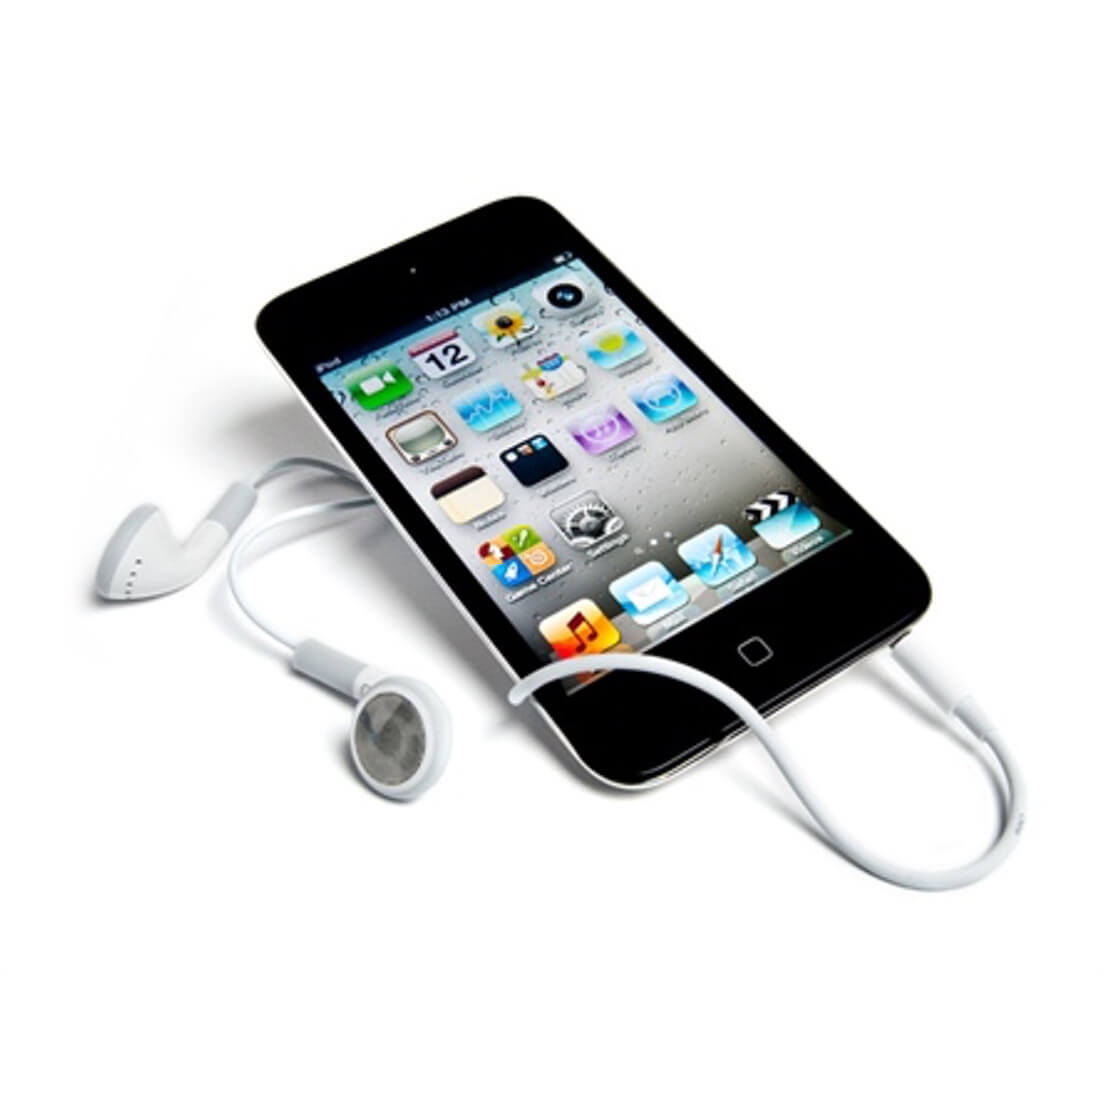 Should i buy my child an ipod touch